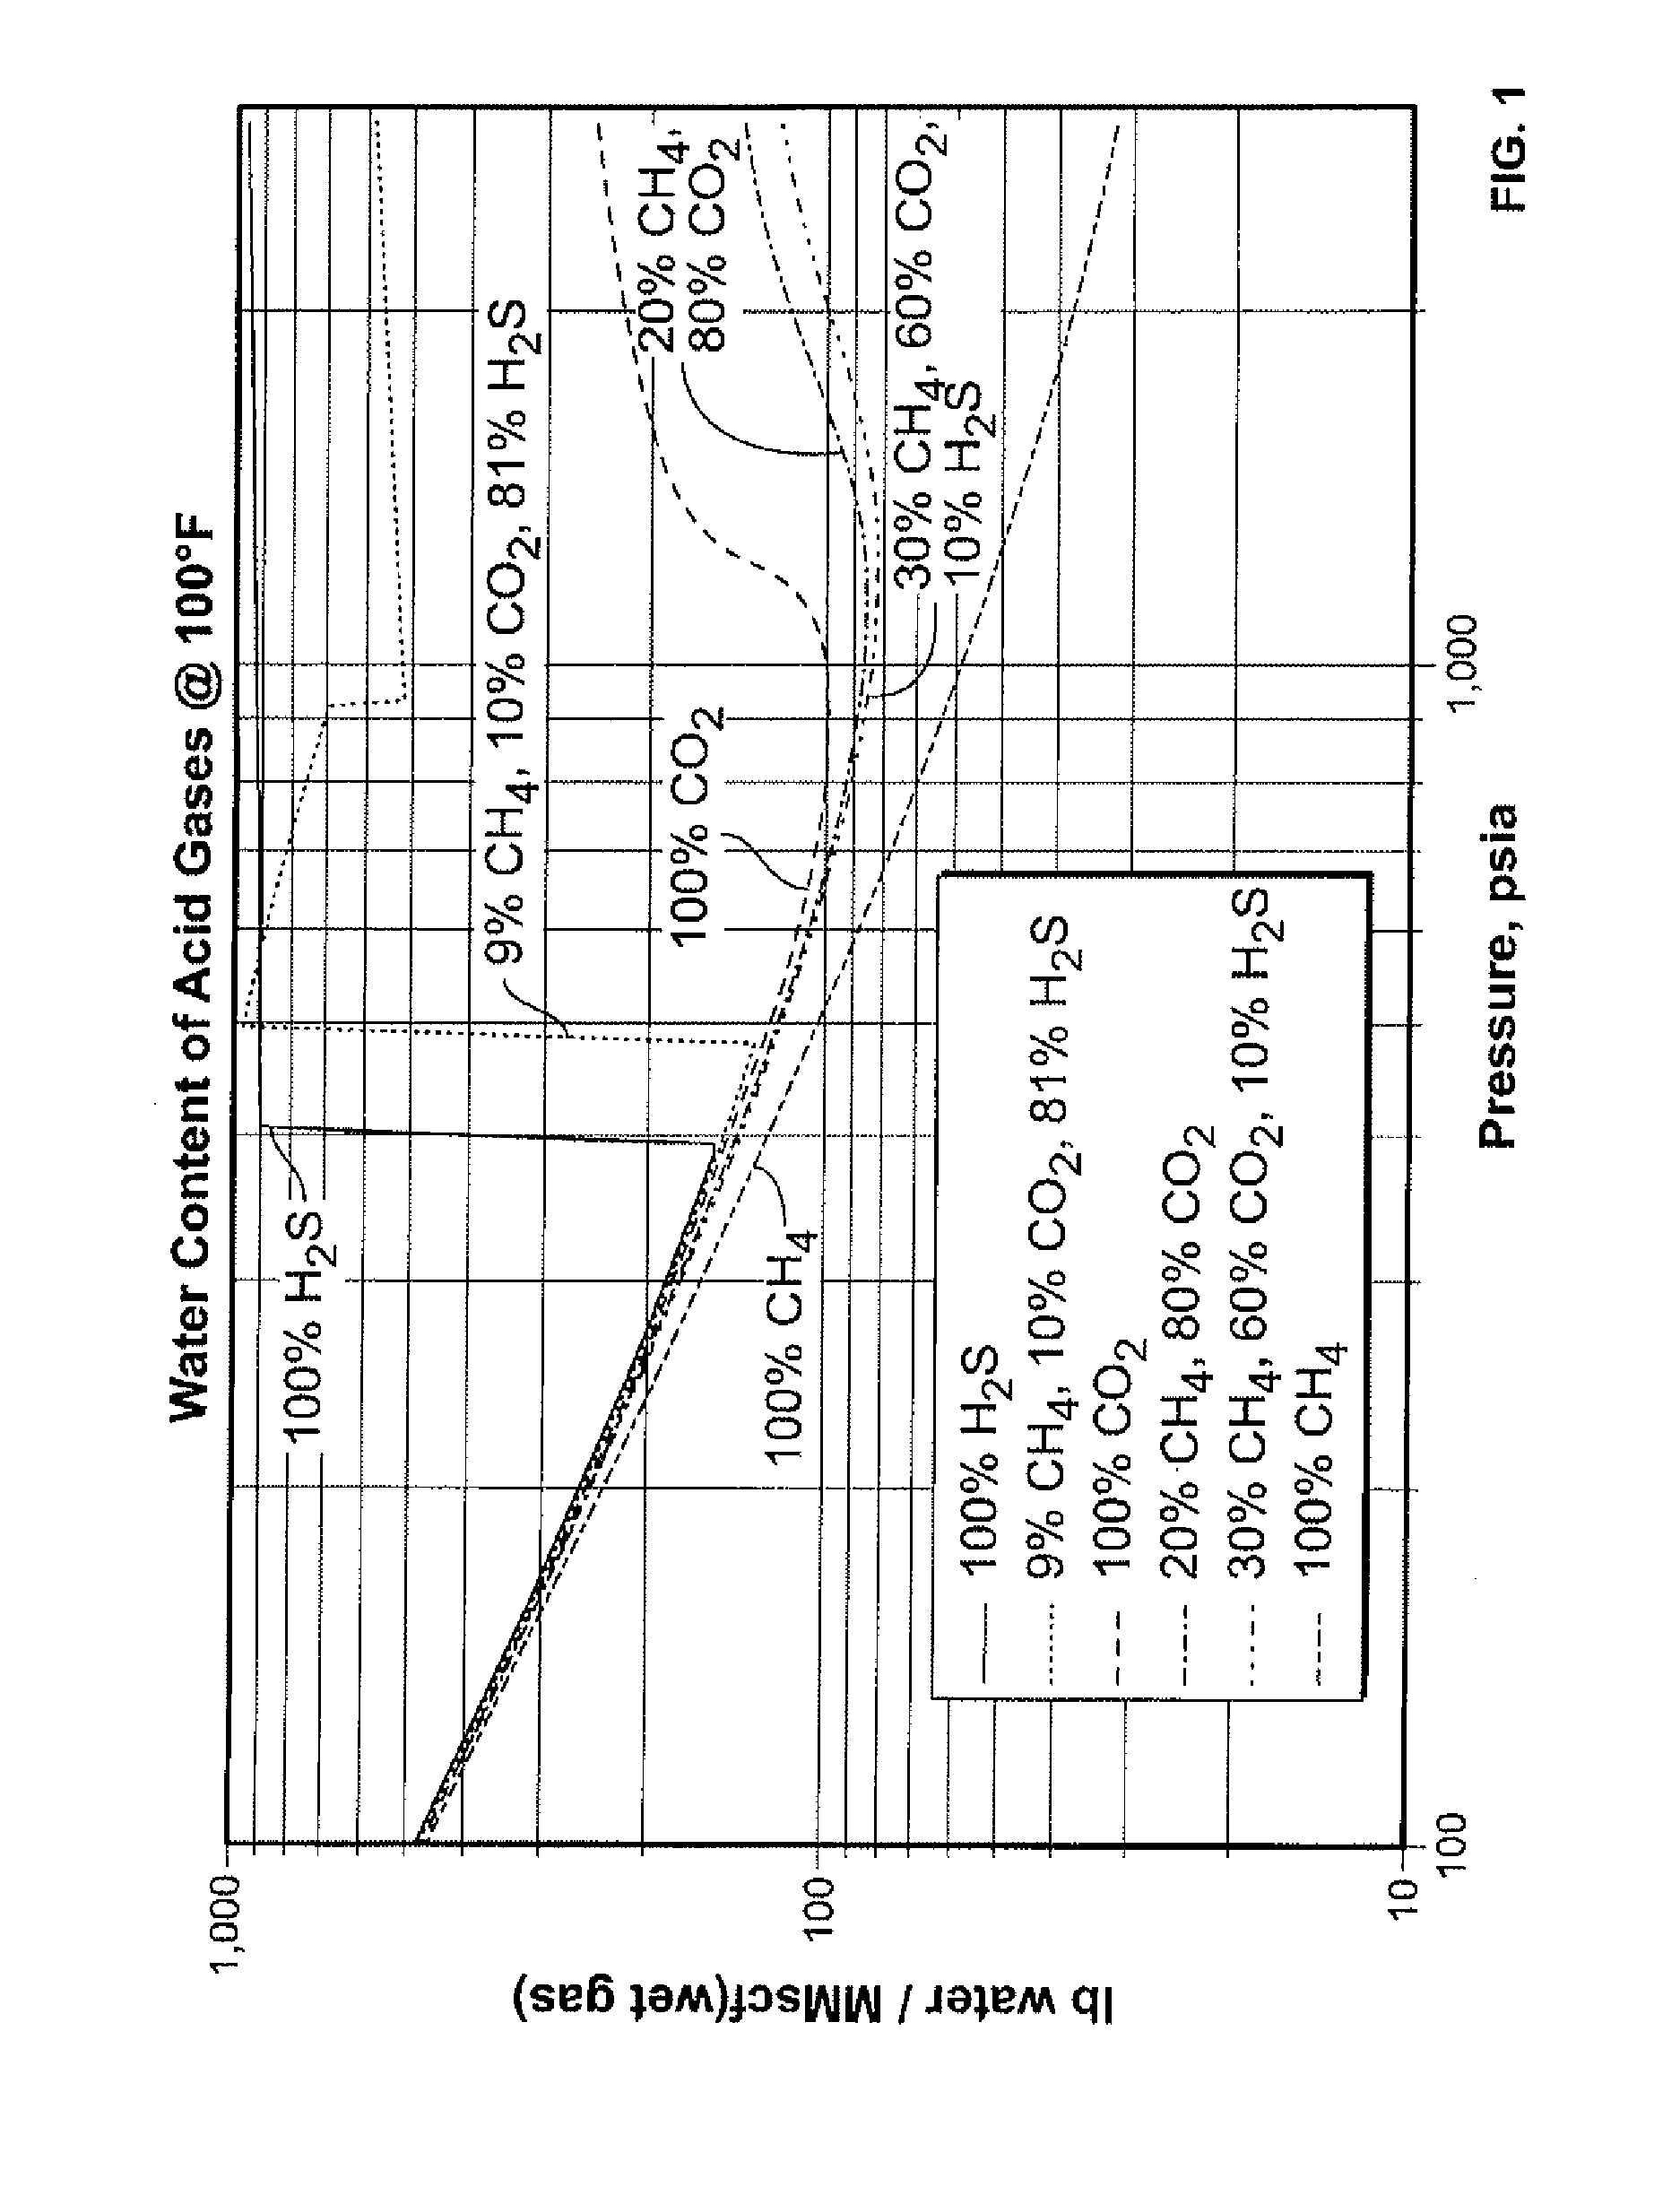 Process for optimizing removal of condensable components from a fluid